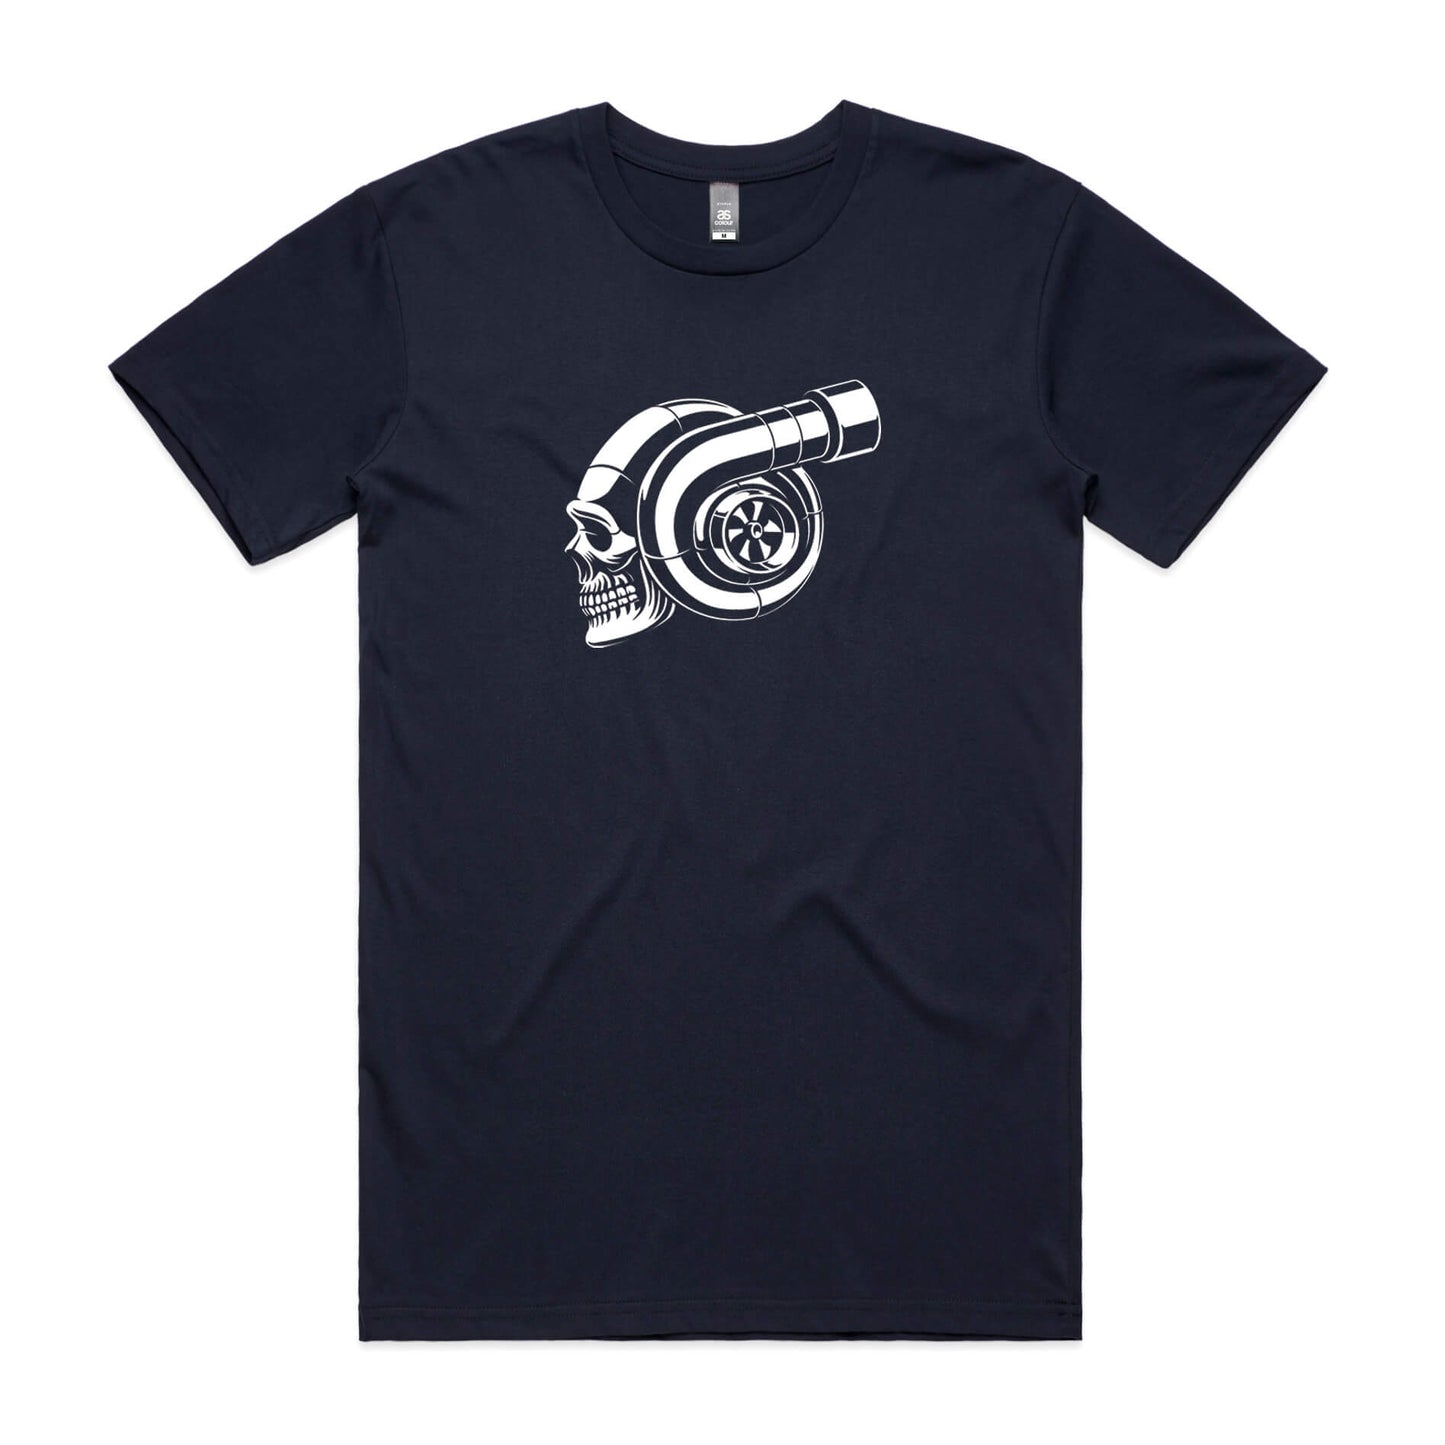 Boosted t-shirt in navy blue with a white graphic of a skull and turbocharger